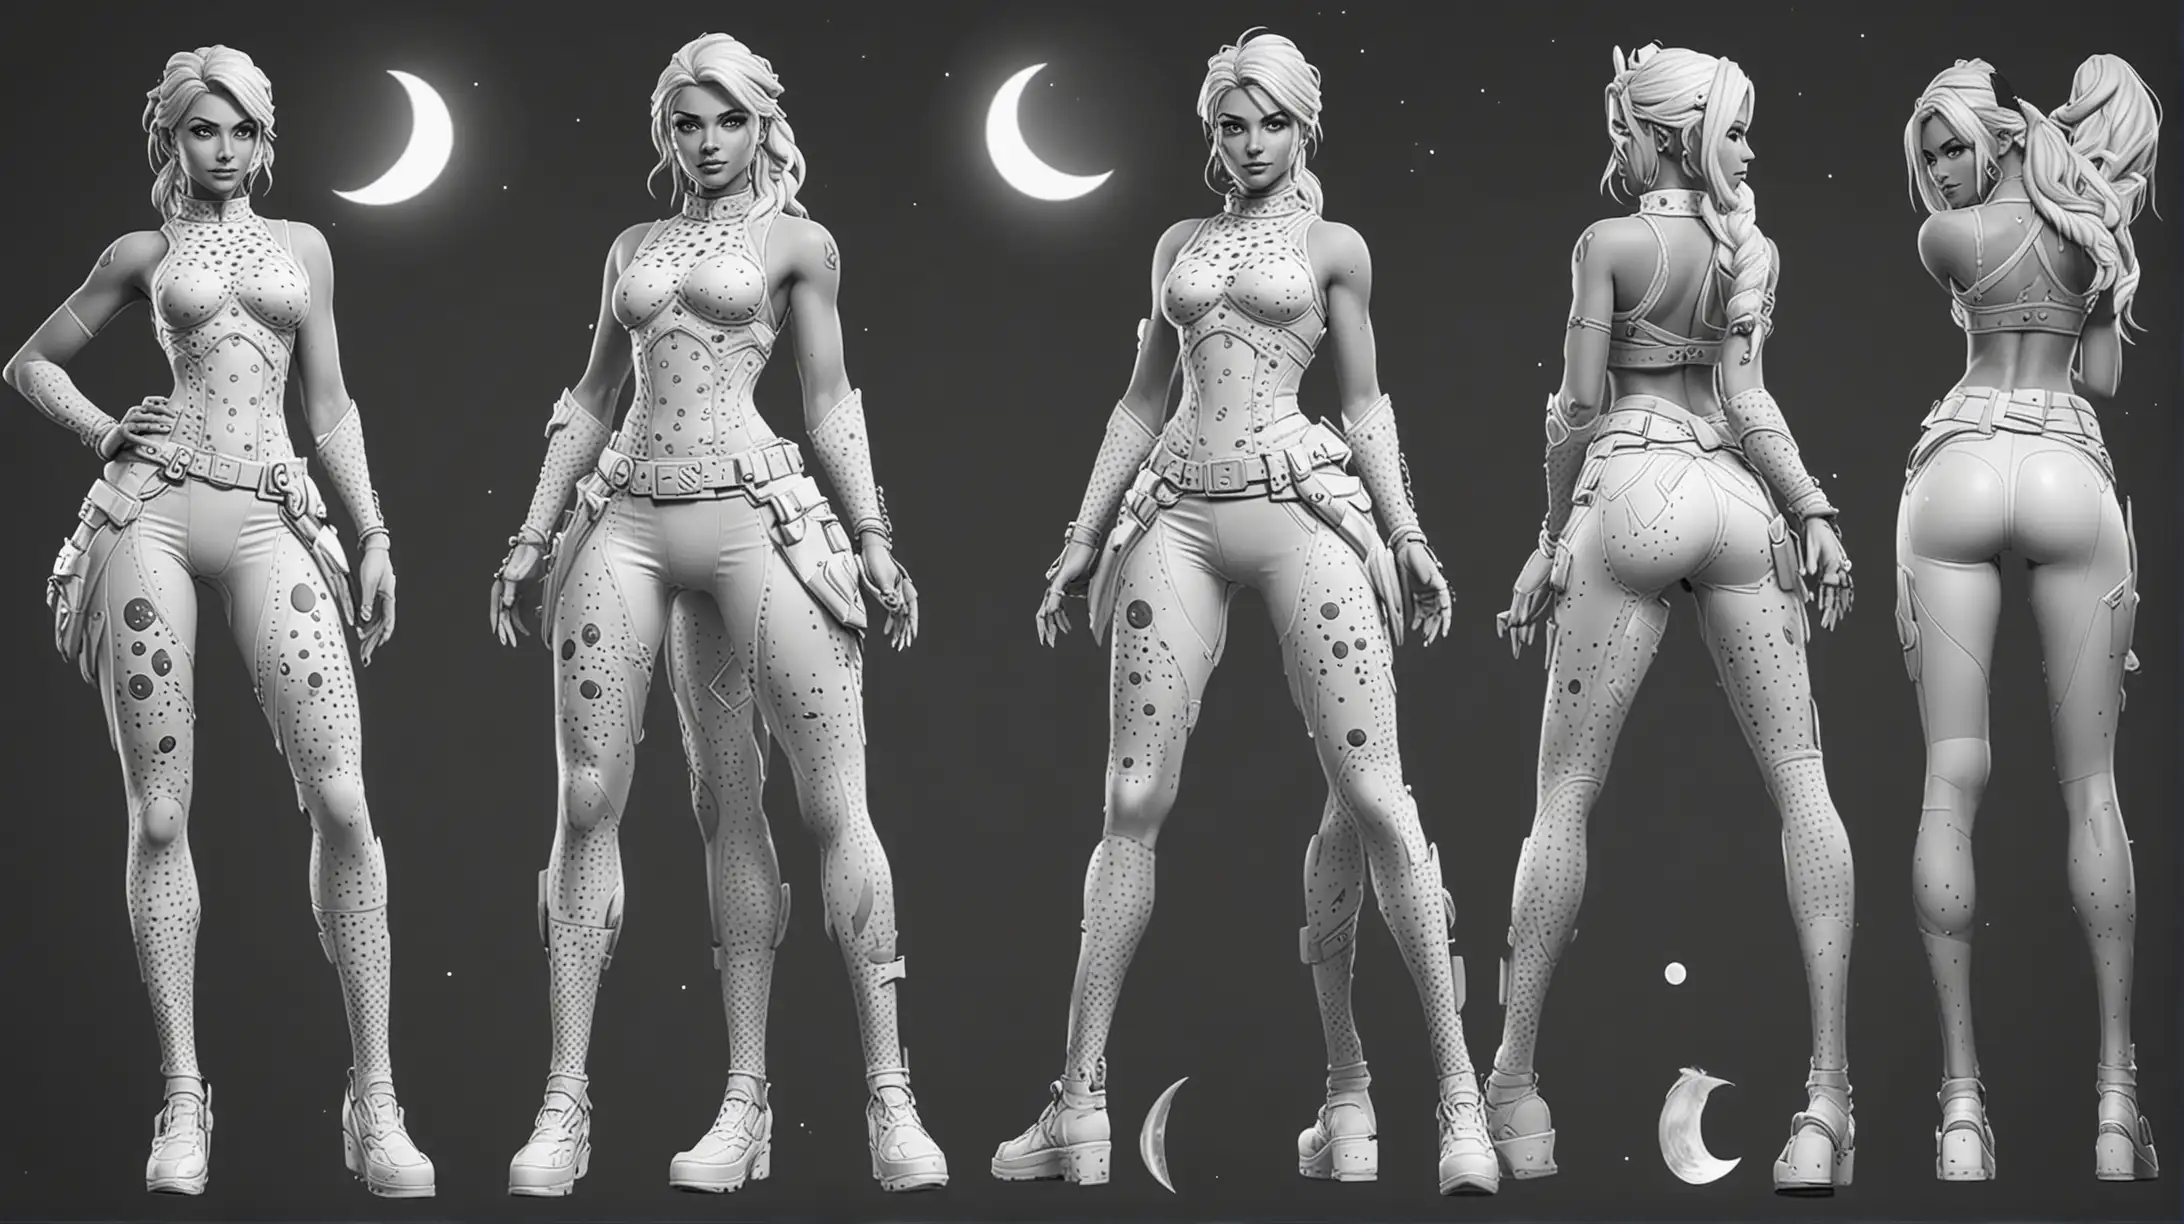 Fortnite Artemis Skins Coloring Pages White Full Body Design with Polka Dot Pants and Moon Accents